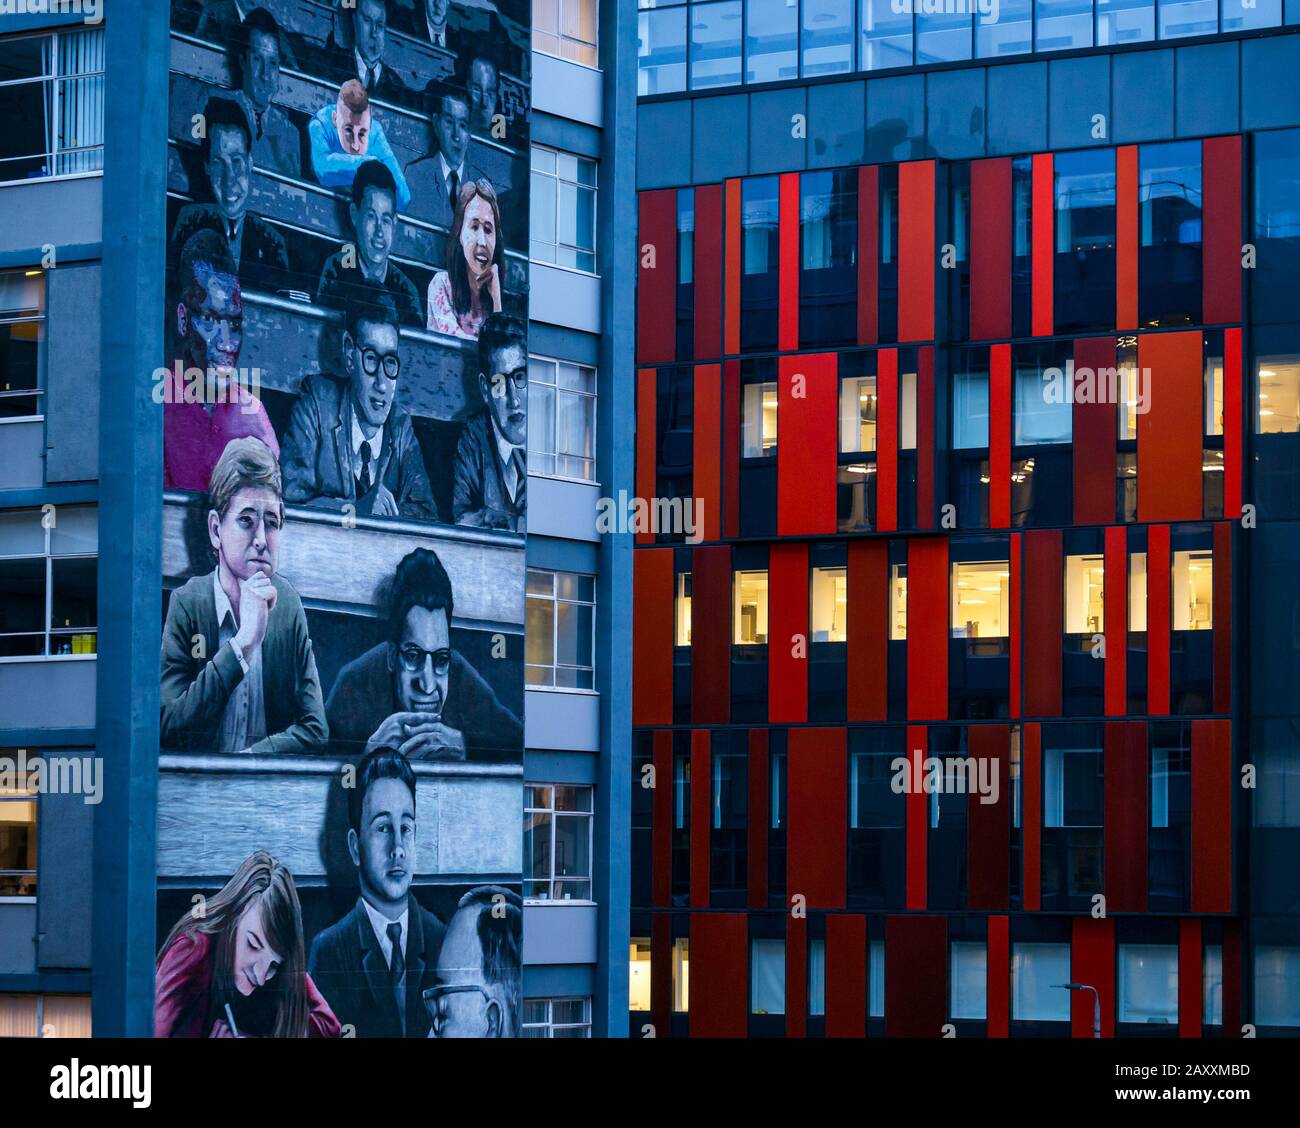 Student lecture mural by Art Pistol, Rogue One & Ejek, Gfraham Hills building at dusk & lit office windows, George Street, Glasgow, Scotland, UK Stock Photo